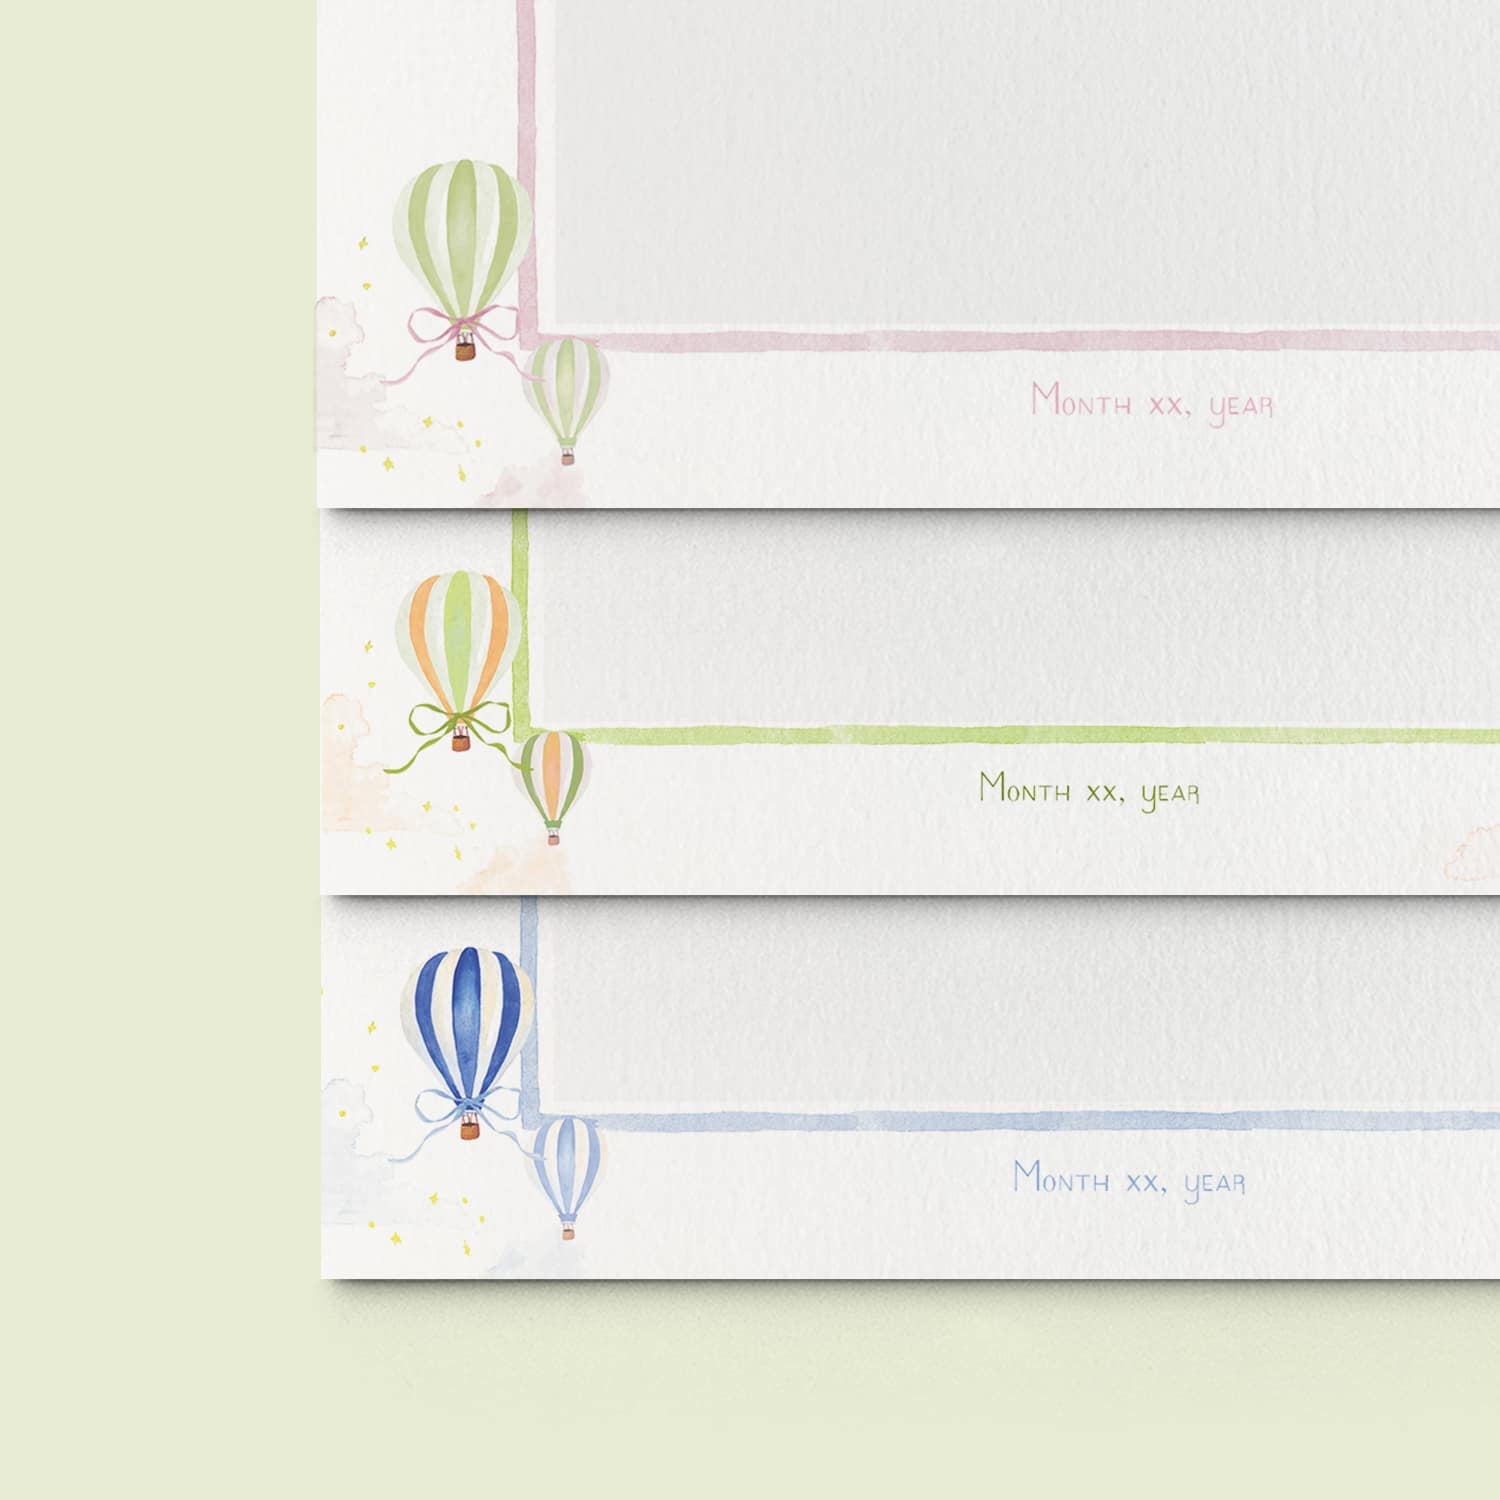 Hot Air Balloons Printed Birth Announcements - With Photo - 02